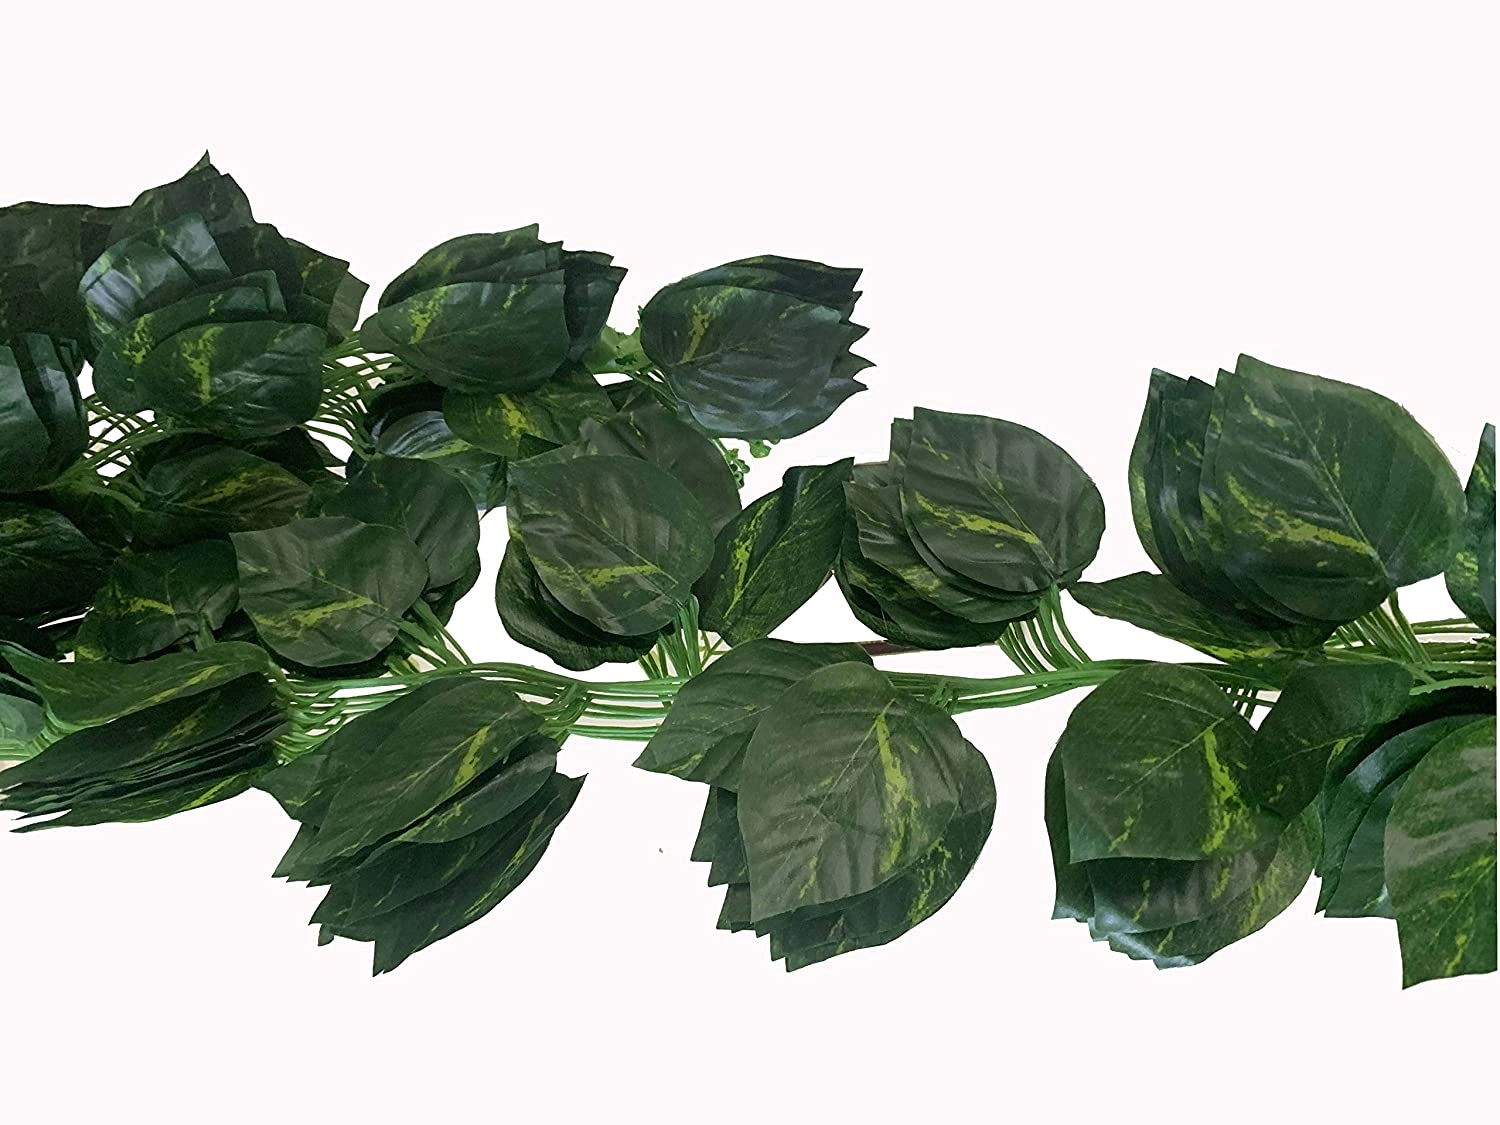 Artificial Leaves (7 feet Approx) Garlands/Creepers for Decoration (Design Same in The Image) 6 pcs-1